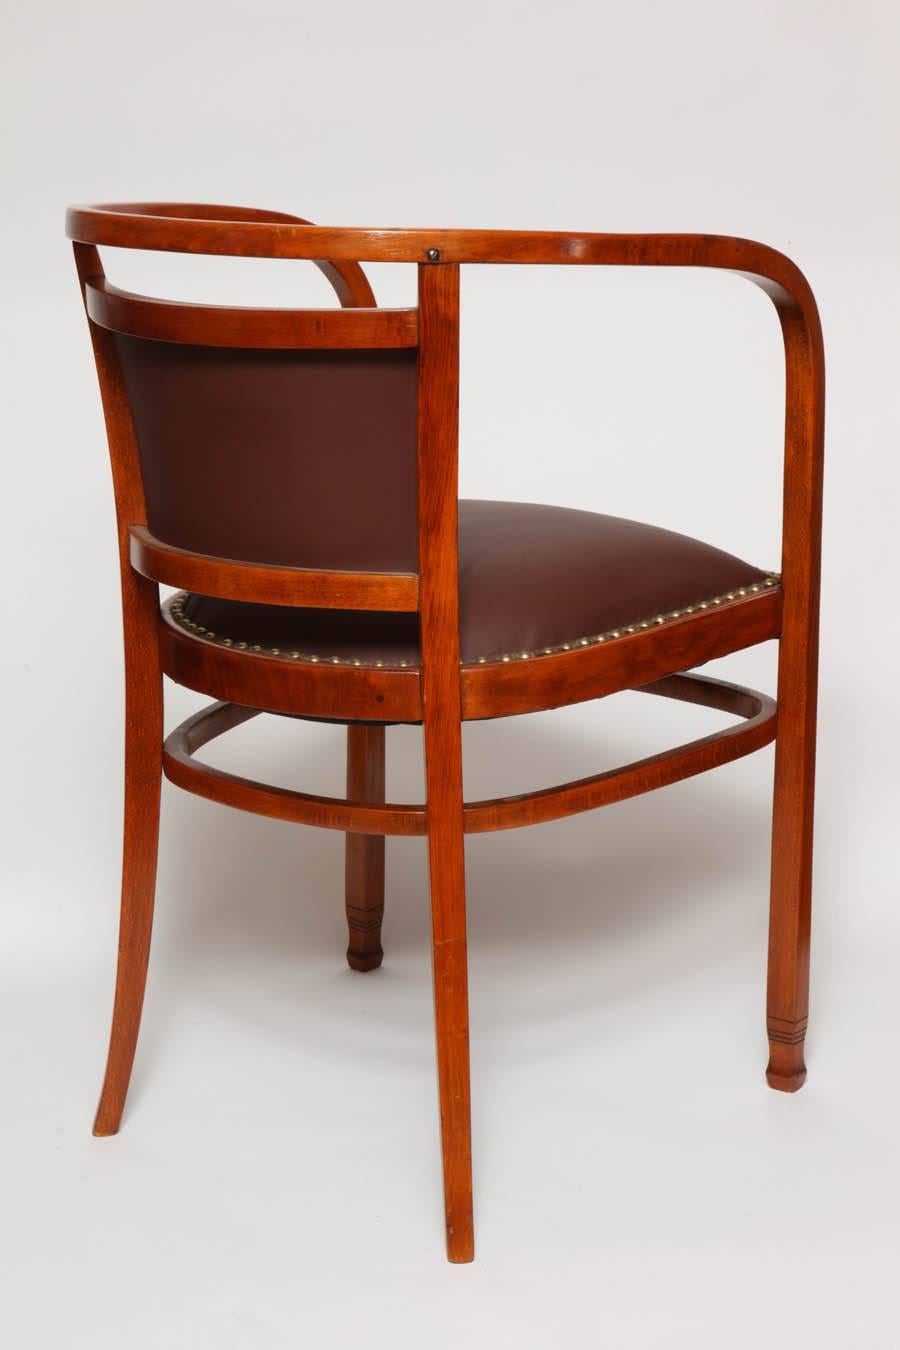 Early 20th Century Otto Wagner Secessionist Bentwood and Leather Armchair, J&J Kohn, 1906 For Sale